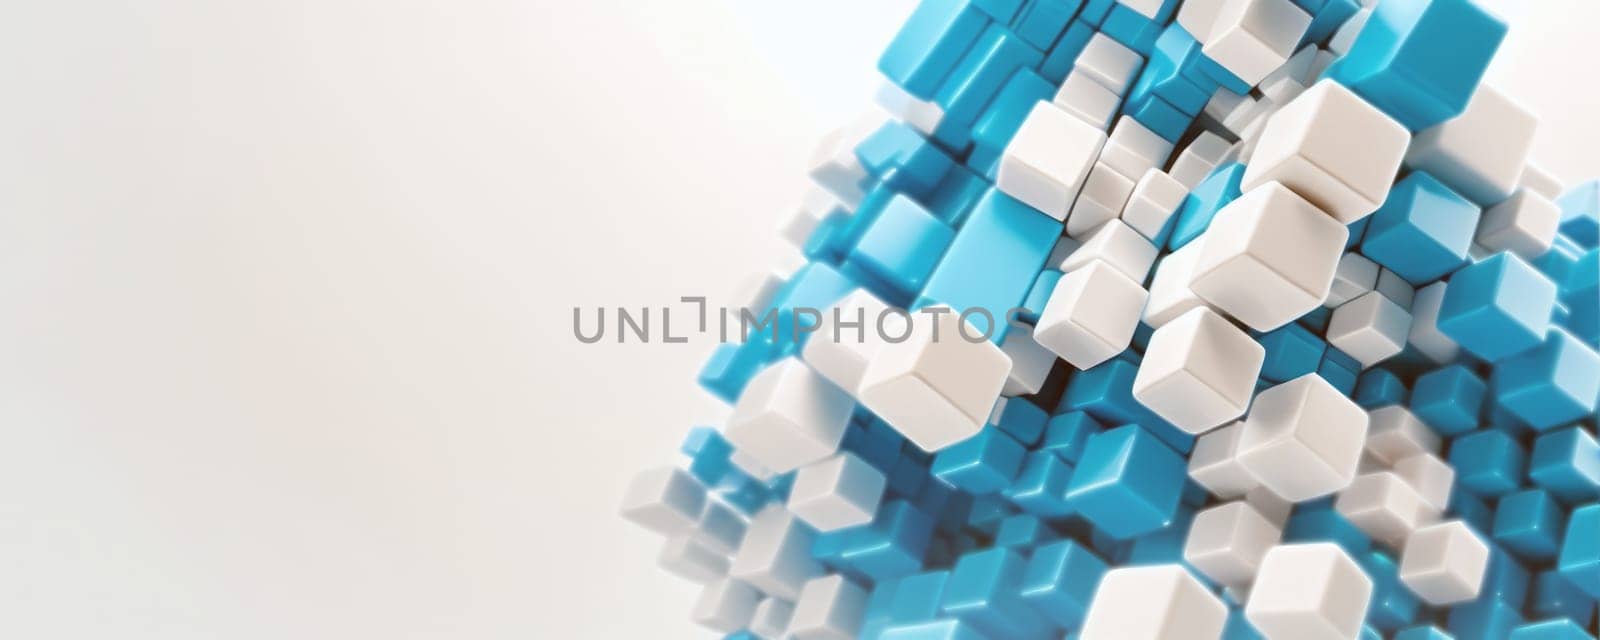 Cluster of 3D Cubes in Blue and White by nkotlyar